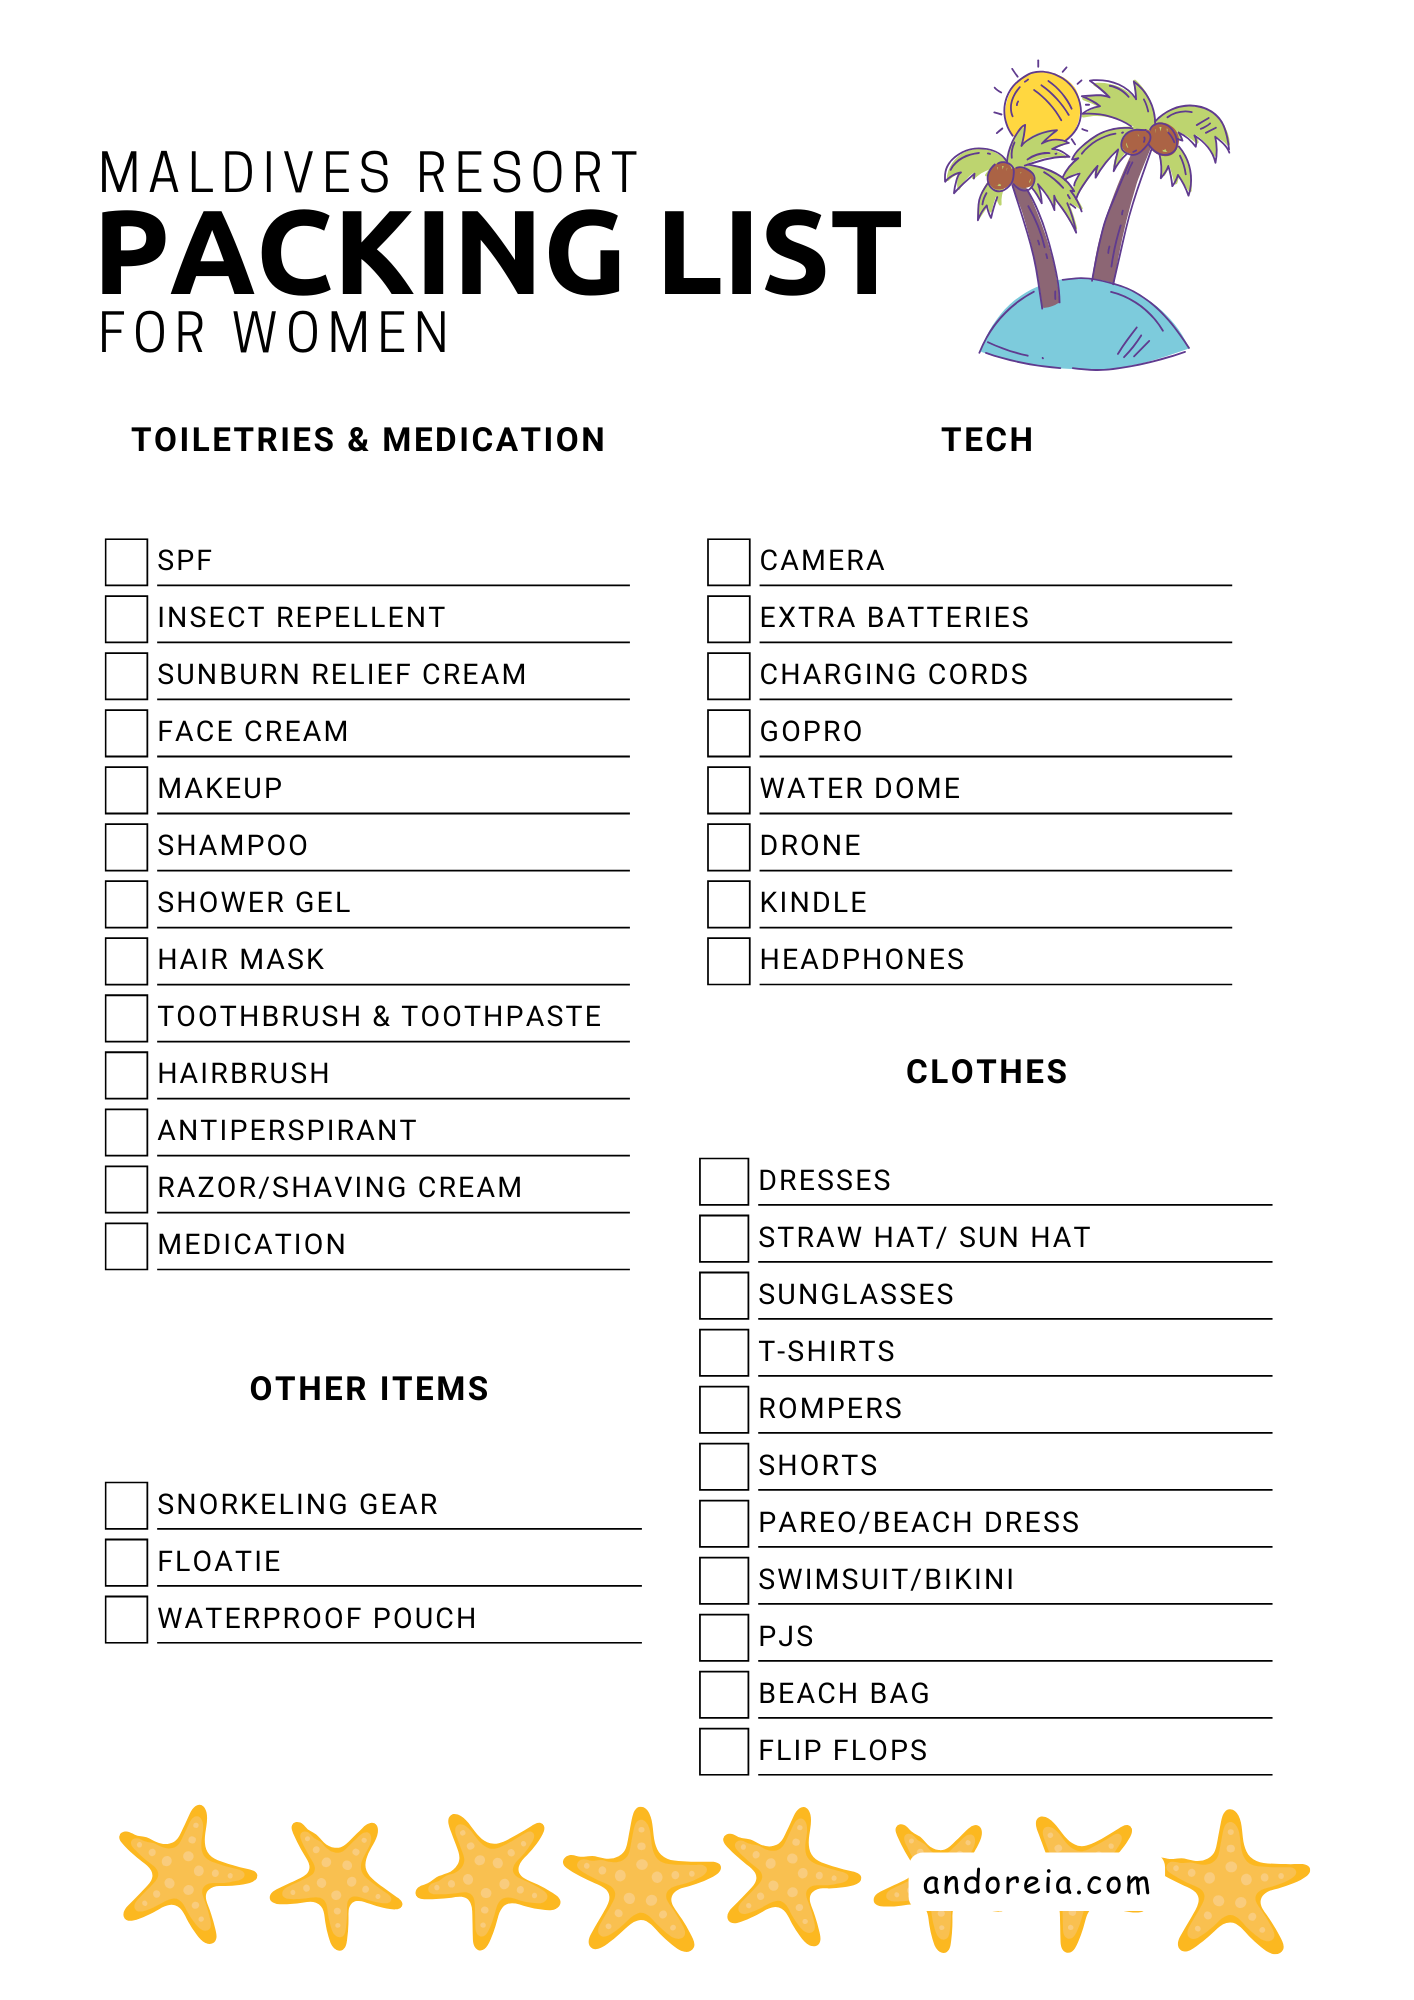 Maldives Resort Packing List for Women (Downloadable PNG)